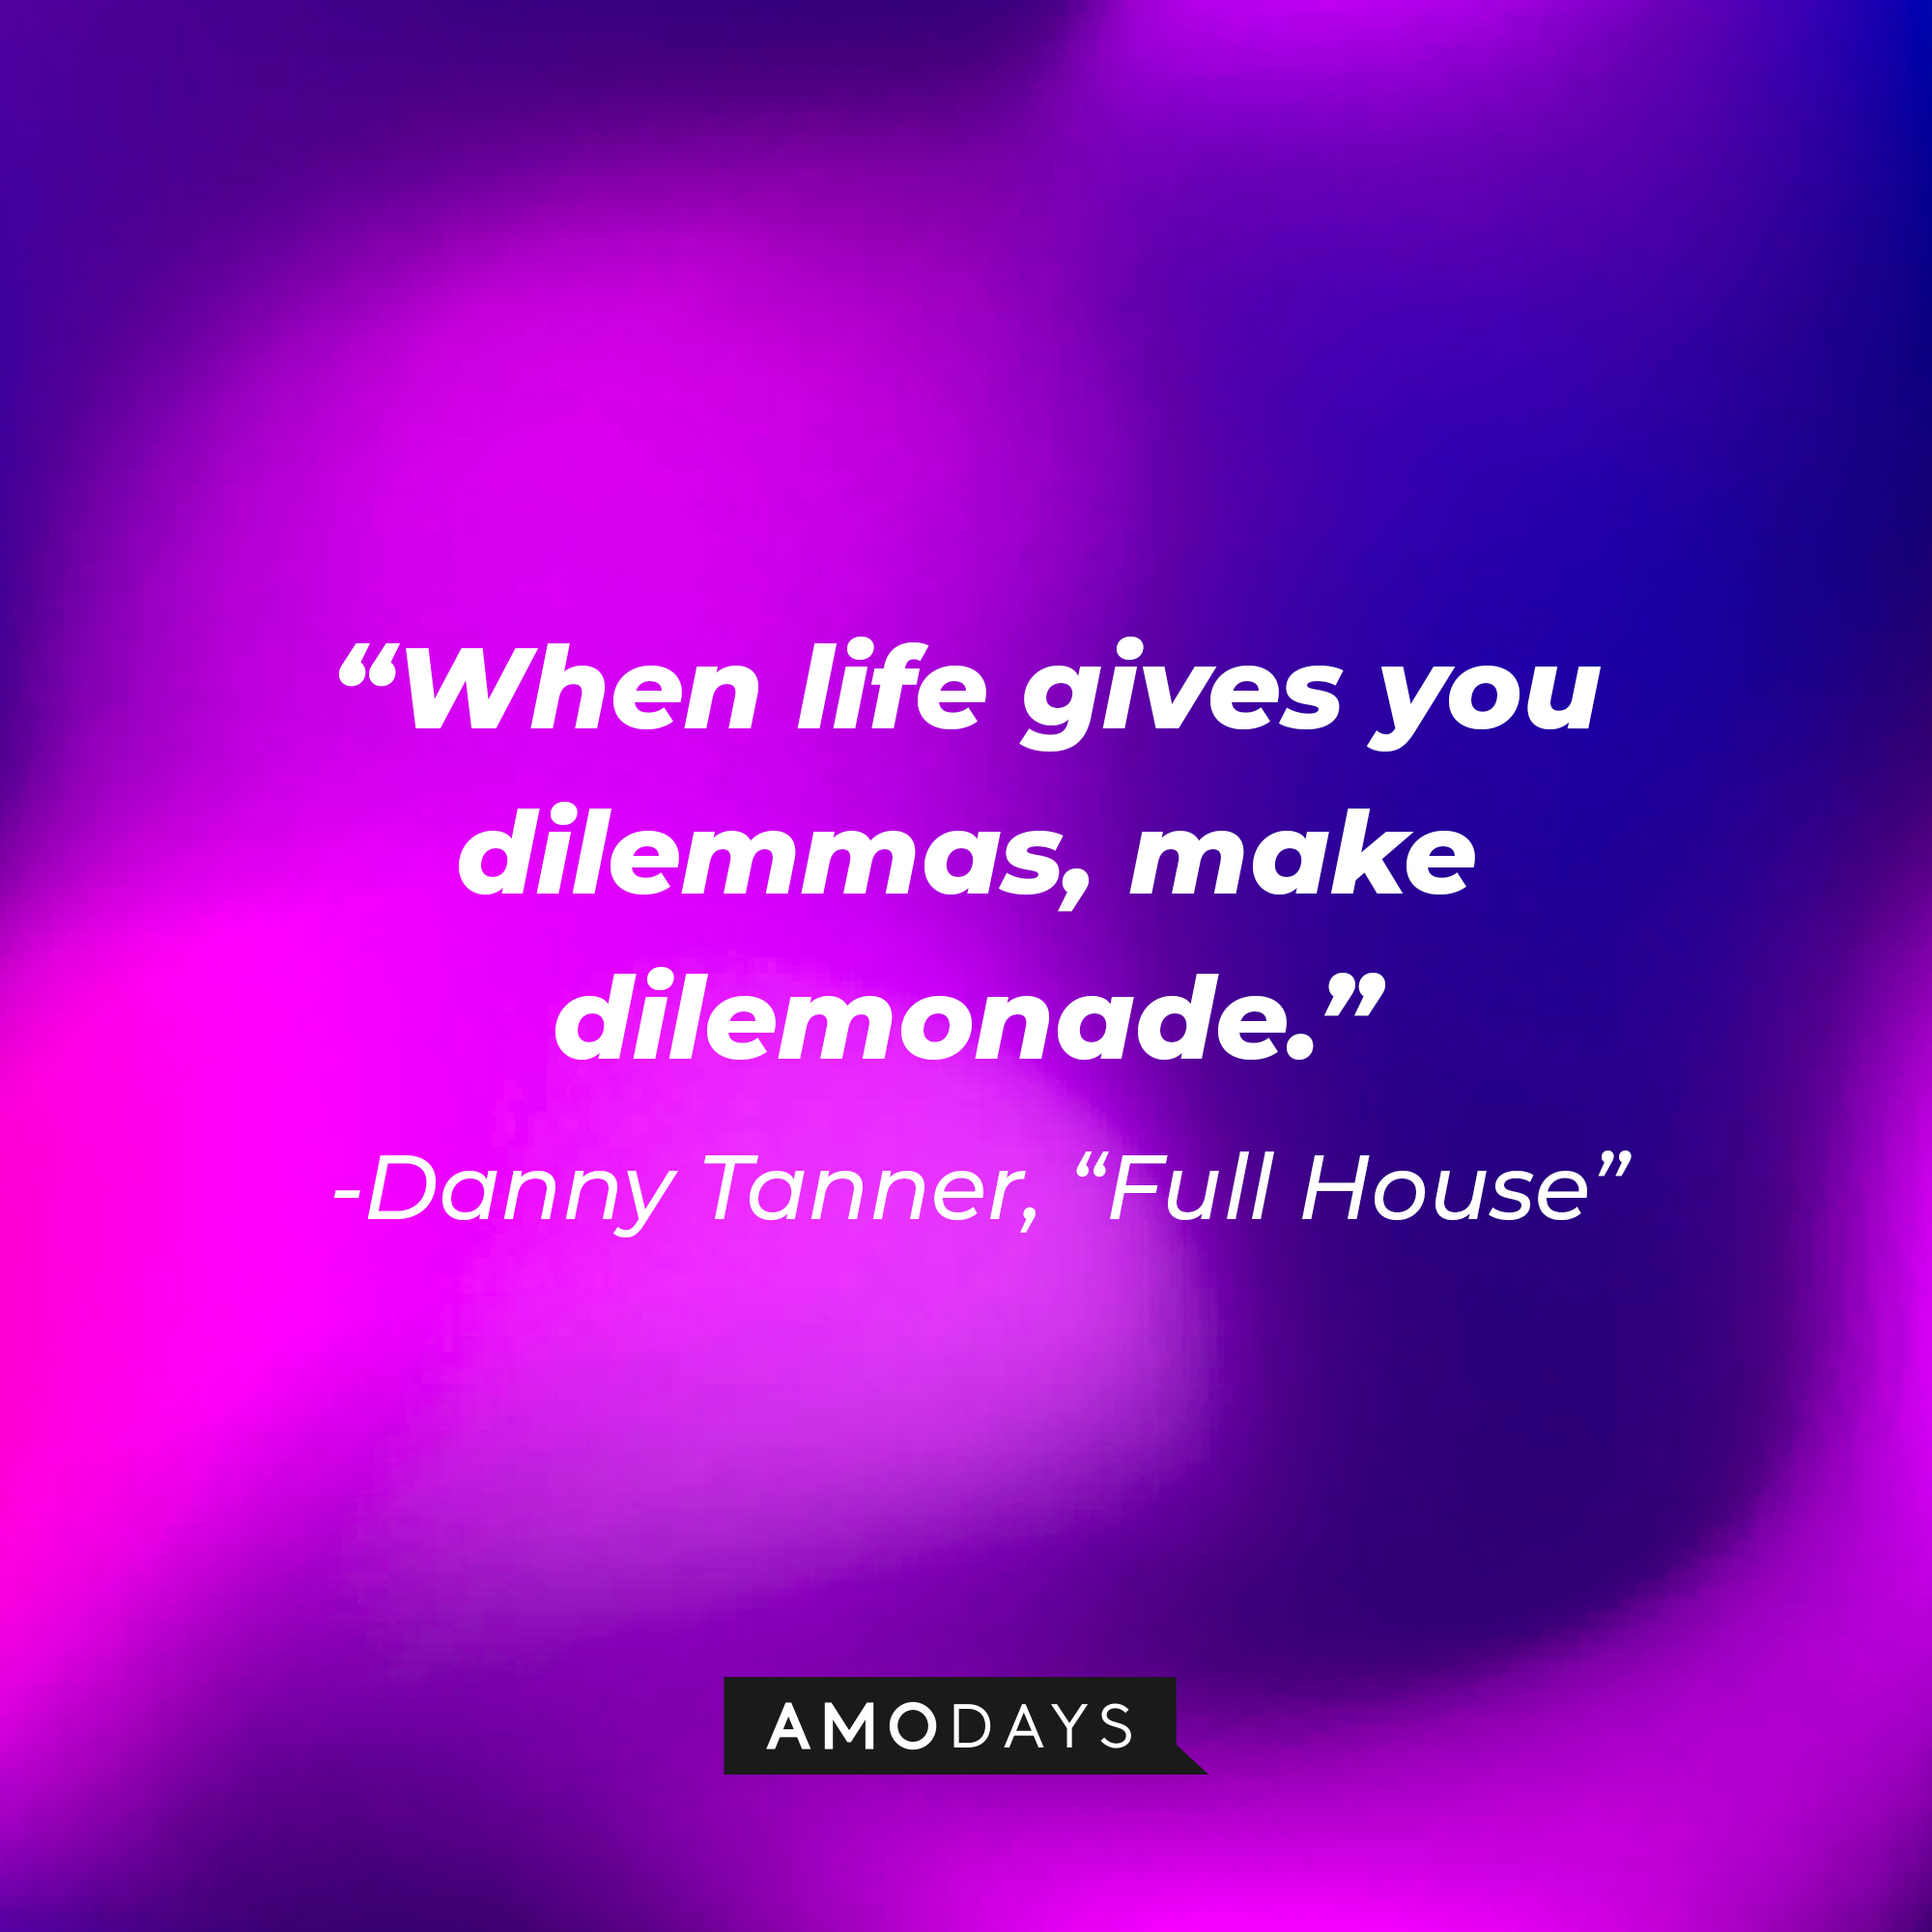 Danny Tanner's quote from "Full House" : "When life gives you dilemmas, make dilemonade" | Source: facebook.com/FullHouseTVshow